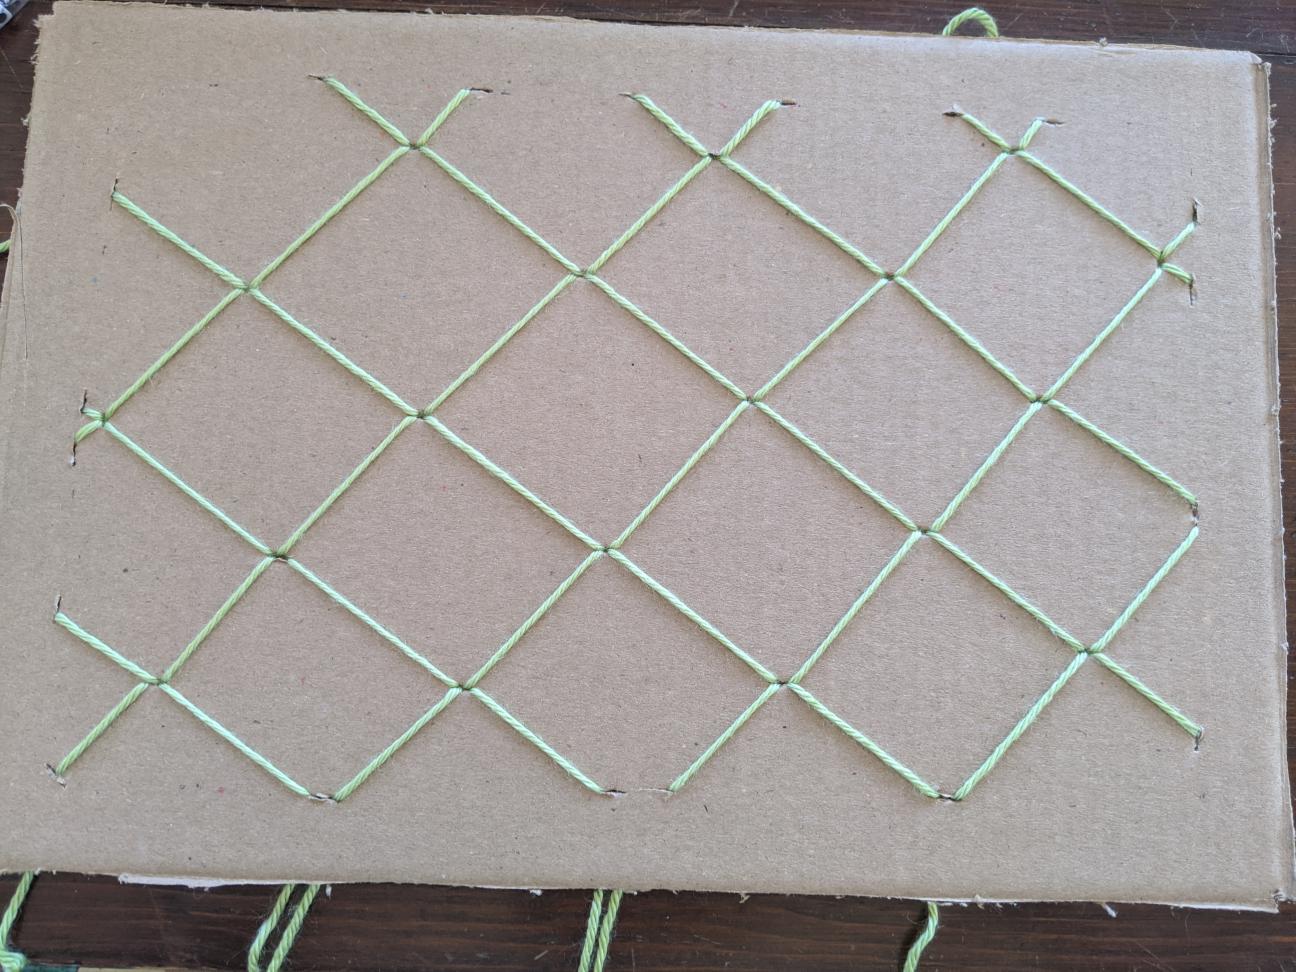 The same board from before, with the overlapping yarn points sercured on the back of the board with a toothpick.